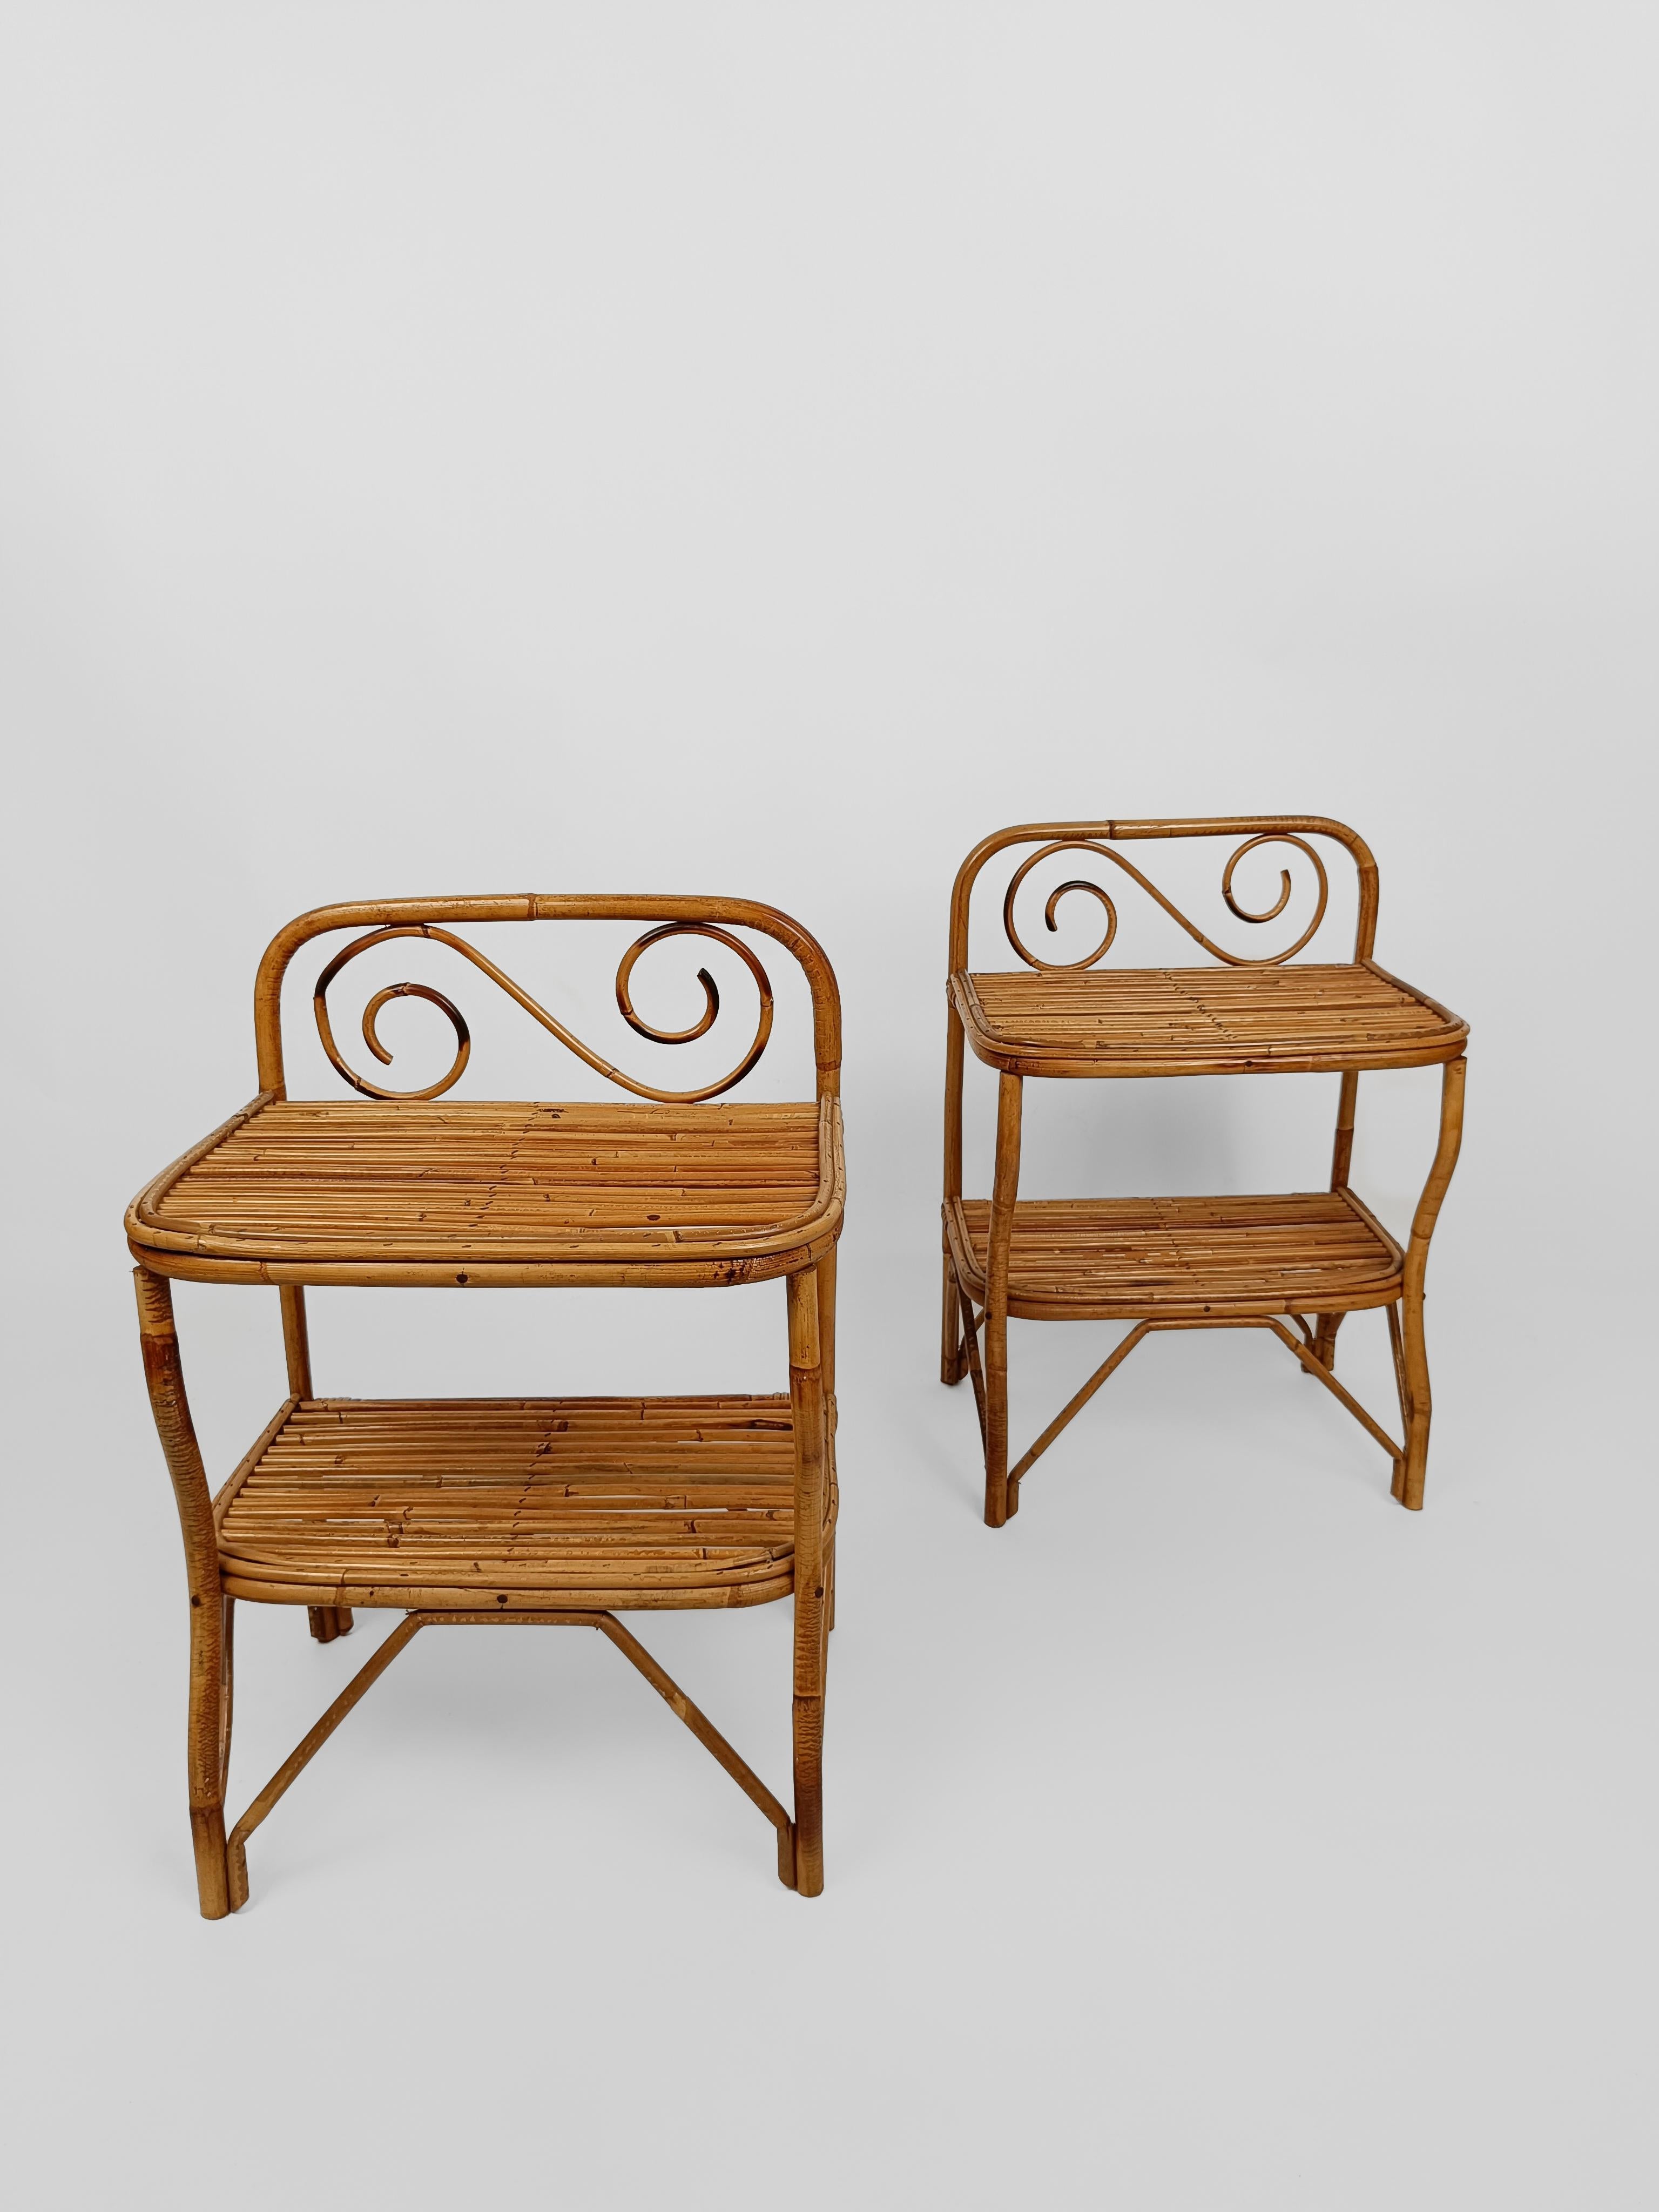 Hand-Crafted Pair of Italian Bedside Table Nightstands in Bamboo, Rattan and Cane, 1960s  For Sale